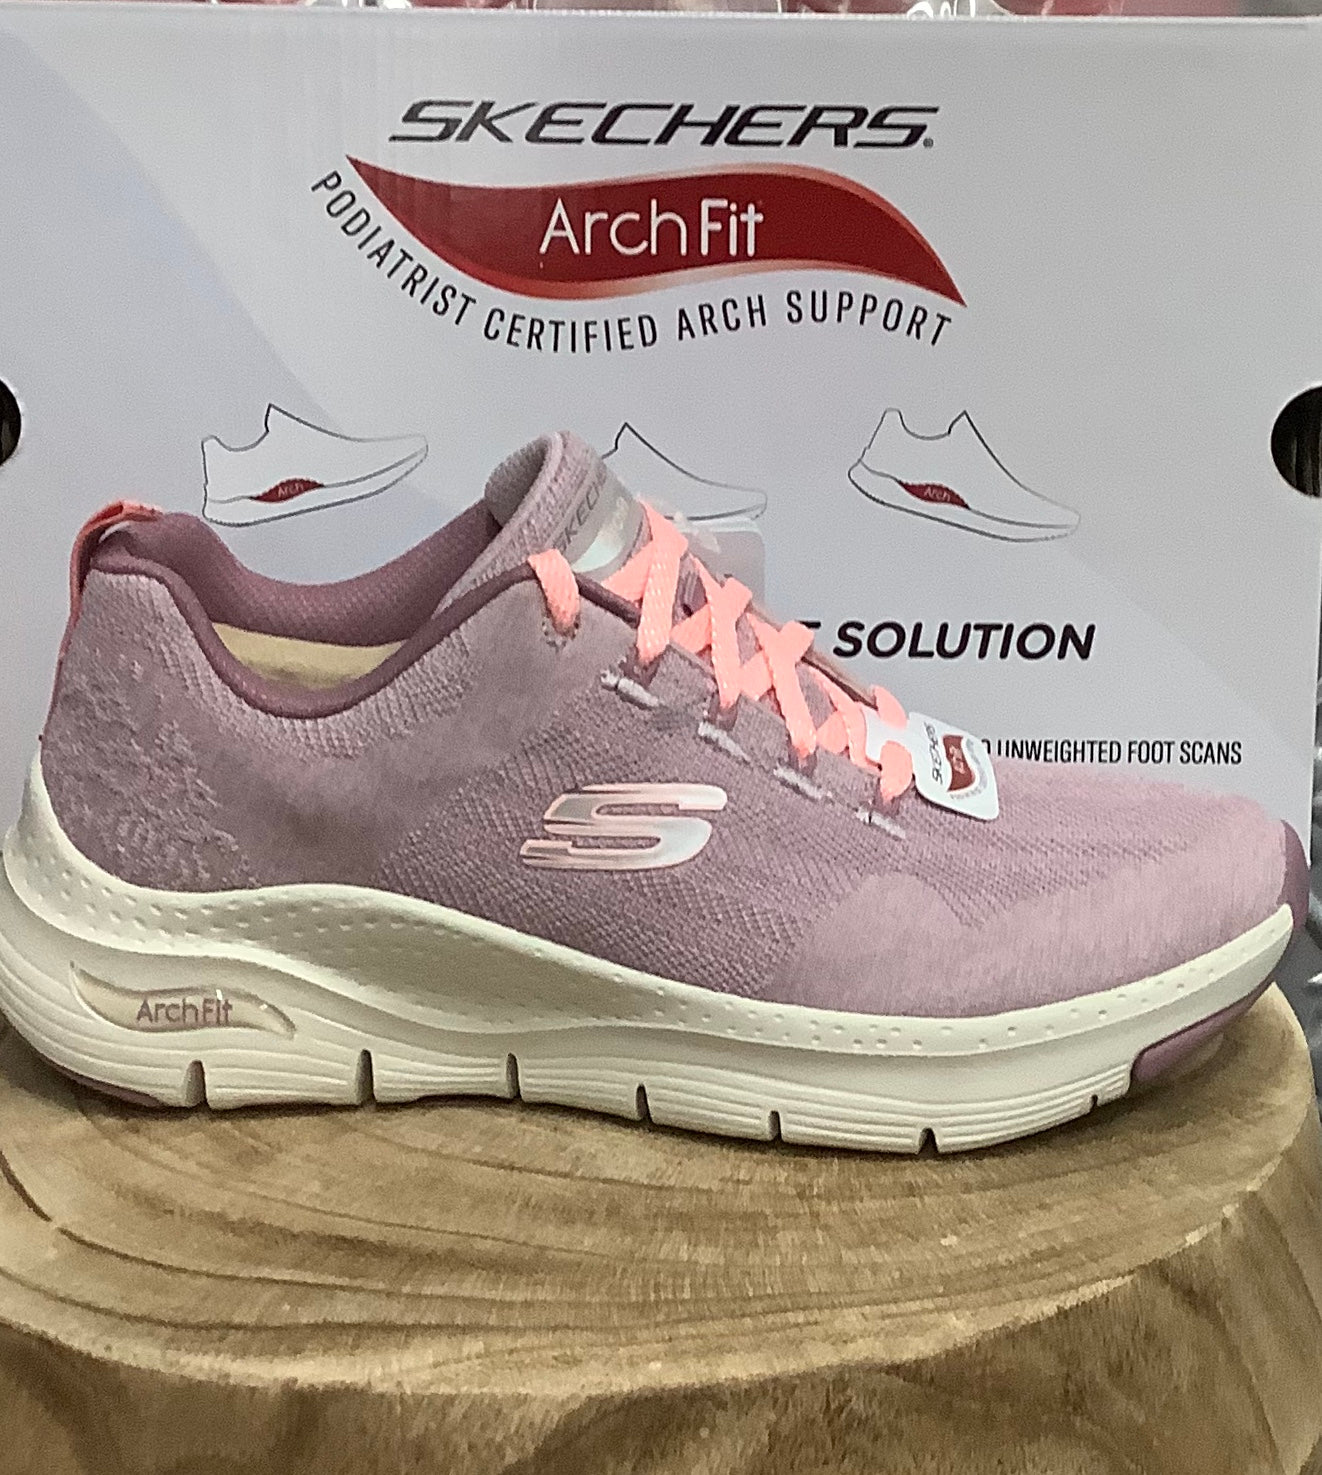 Skechers 149414/Mve Arch fit Comfy Wave - Emelda's Shoes